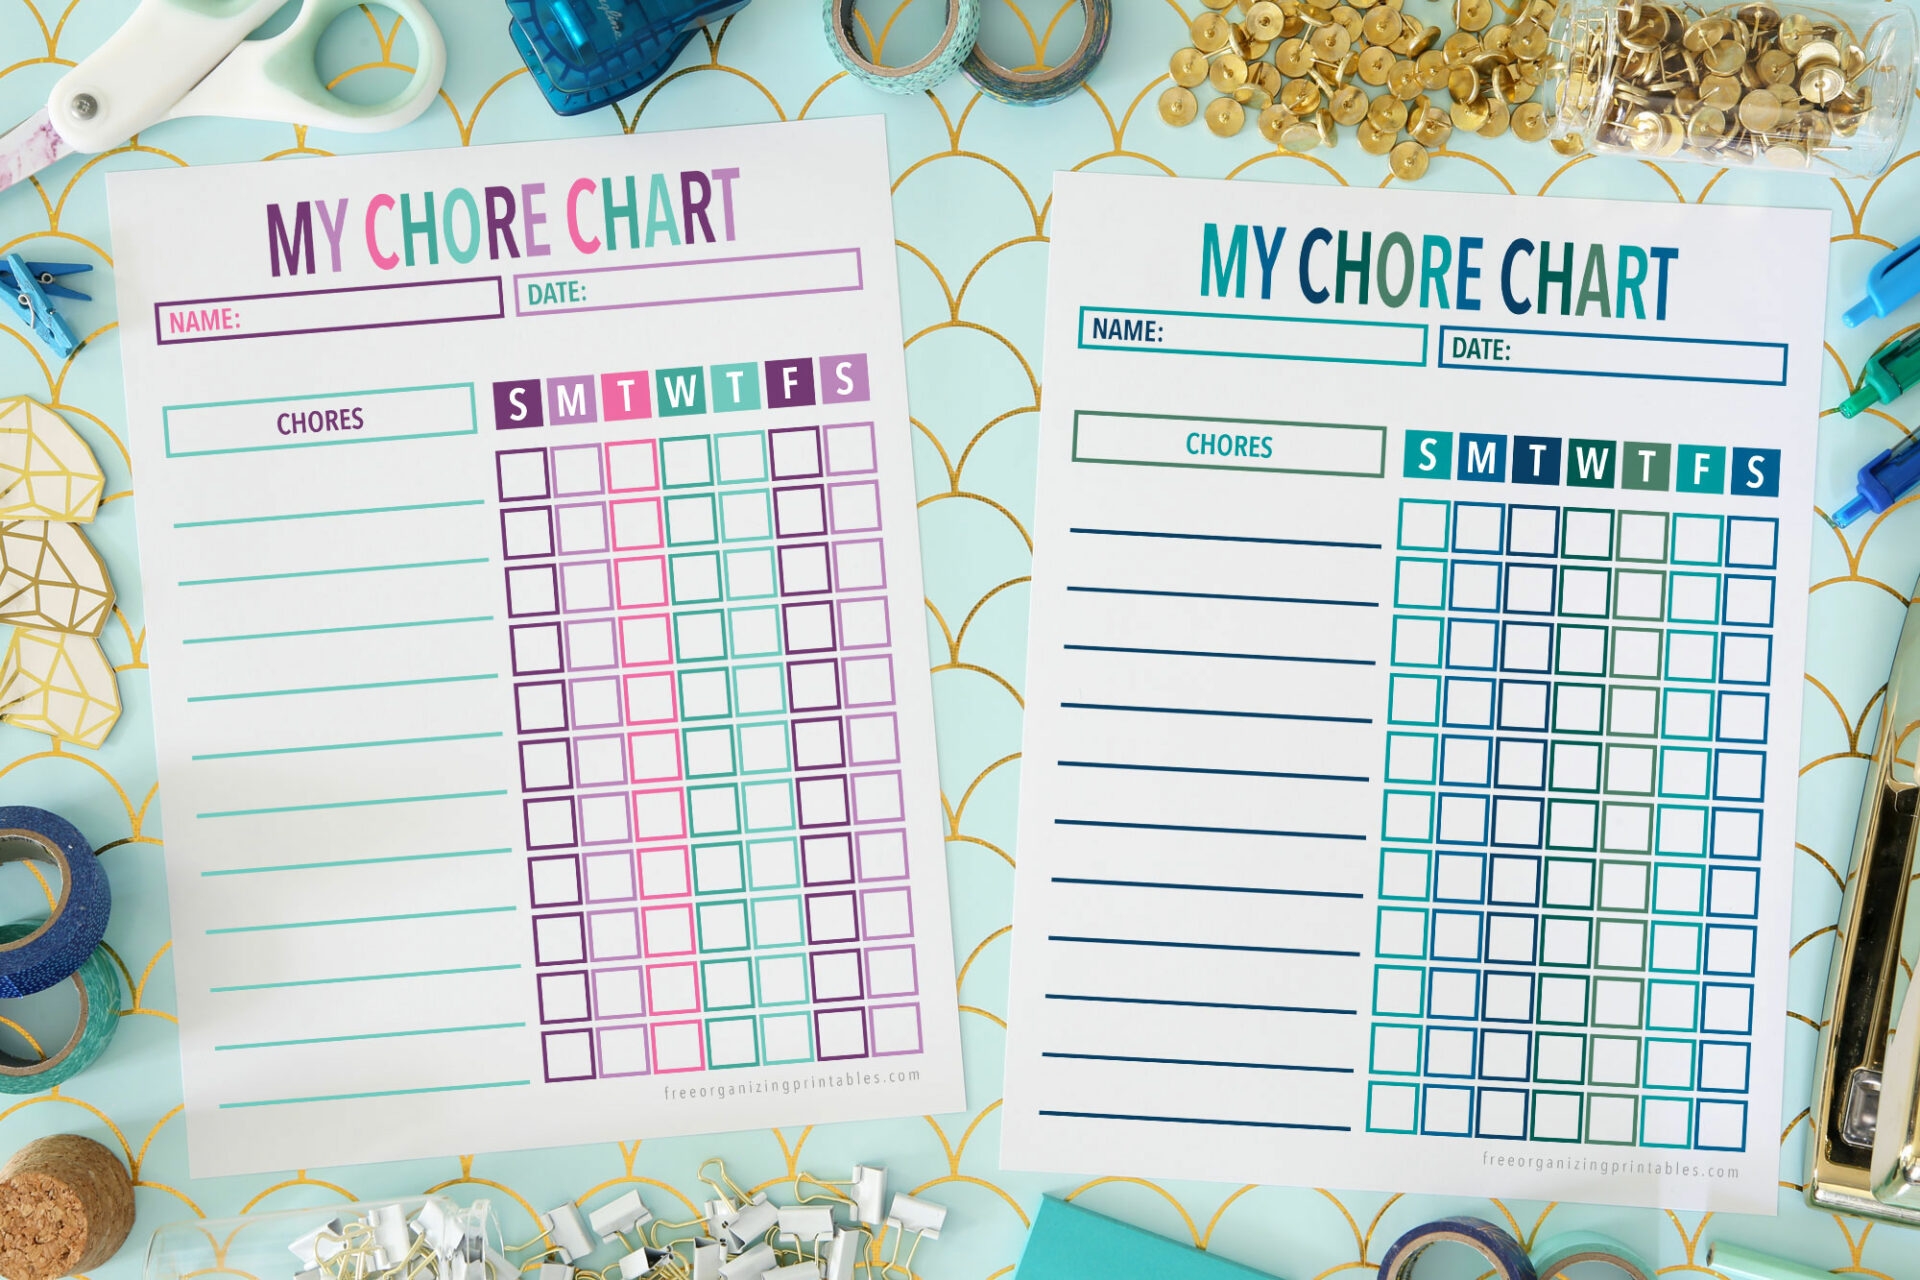 Free Printable Chore Charts For Kids And Adults - Free Printable Chore Charts For Kids With Pictures